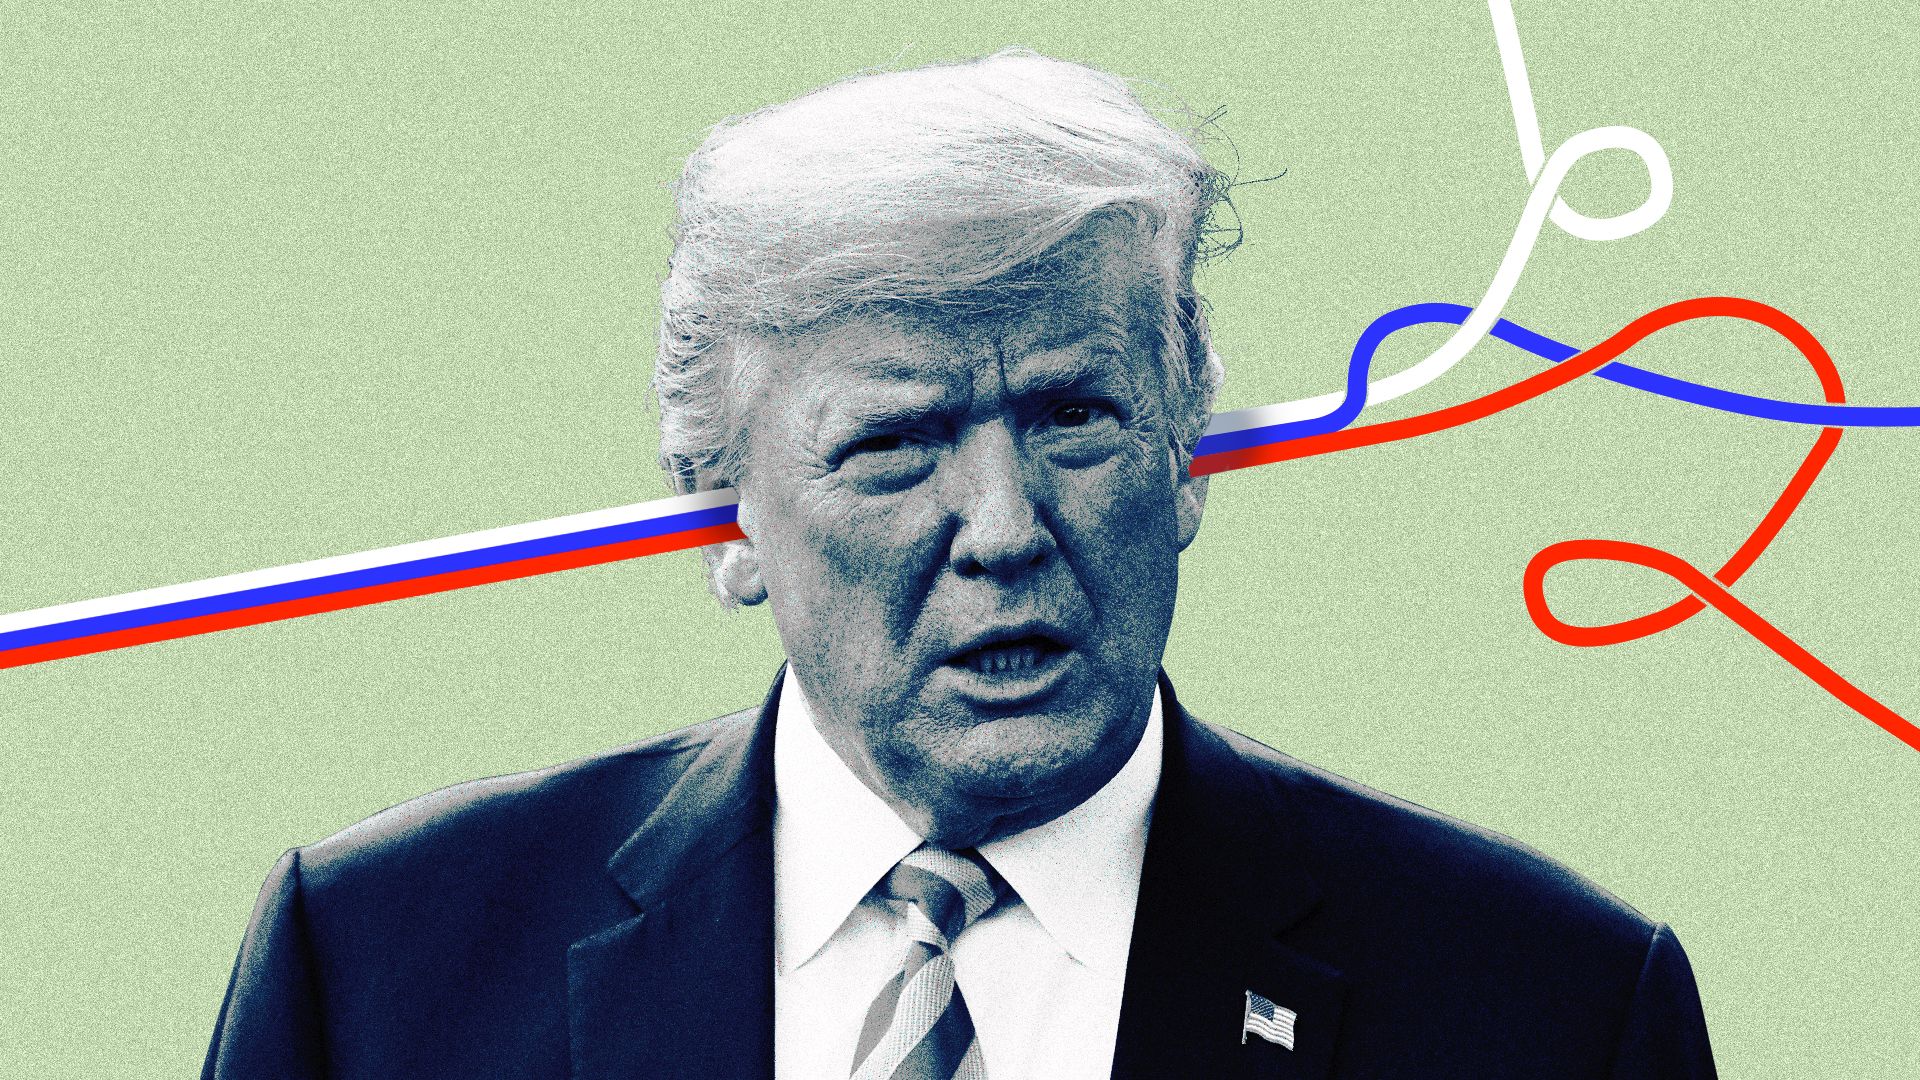 An illustration of President Trump with the colors of the Russian flag